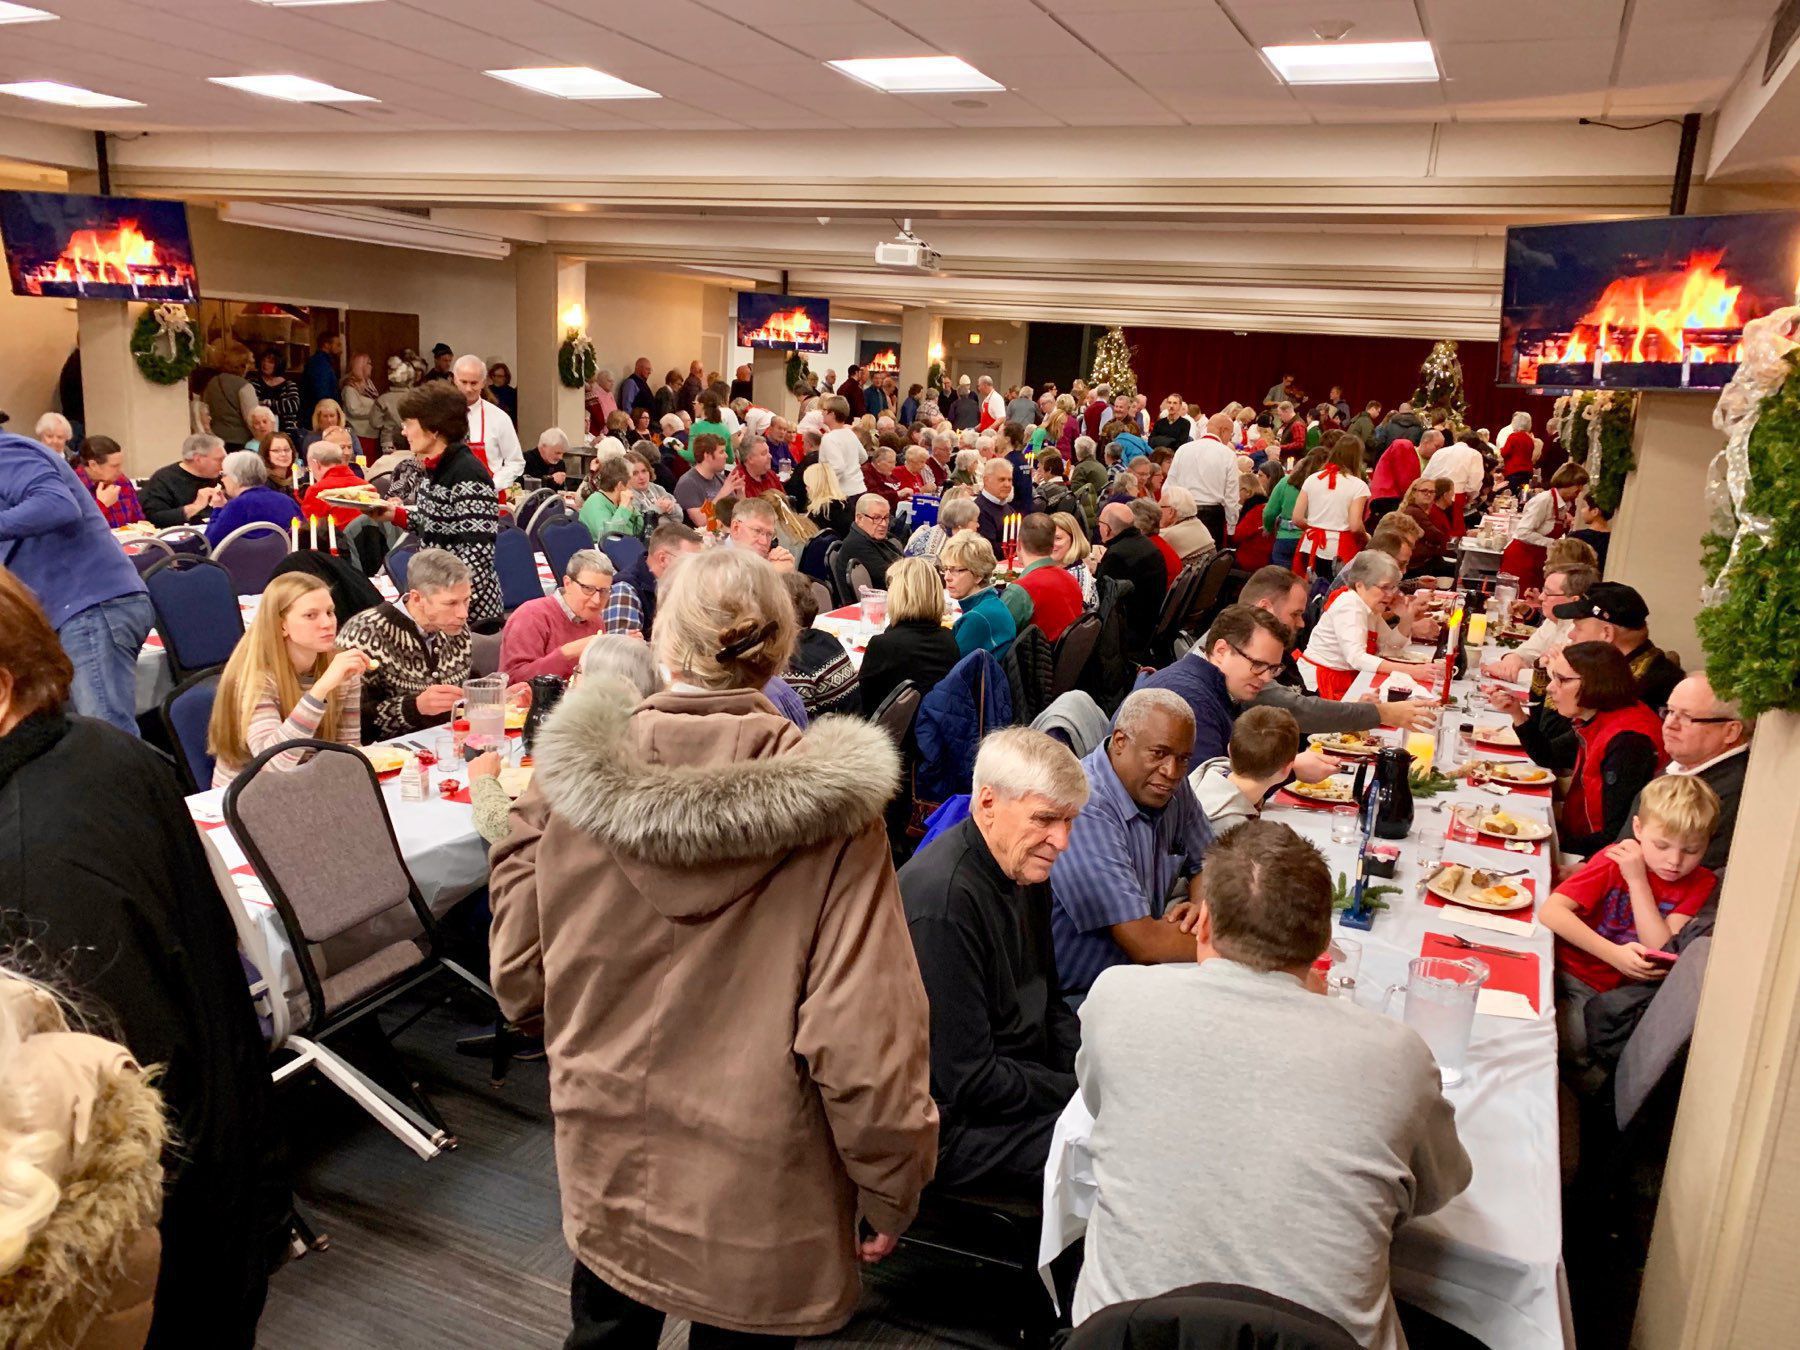 Big Crowd for the Lutefisk Dinner